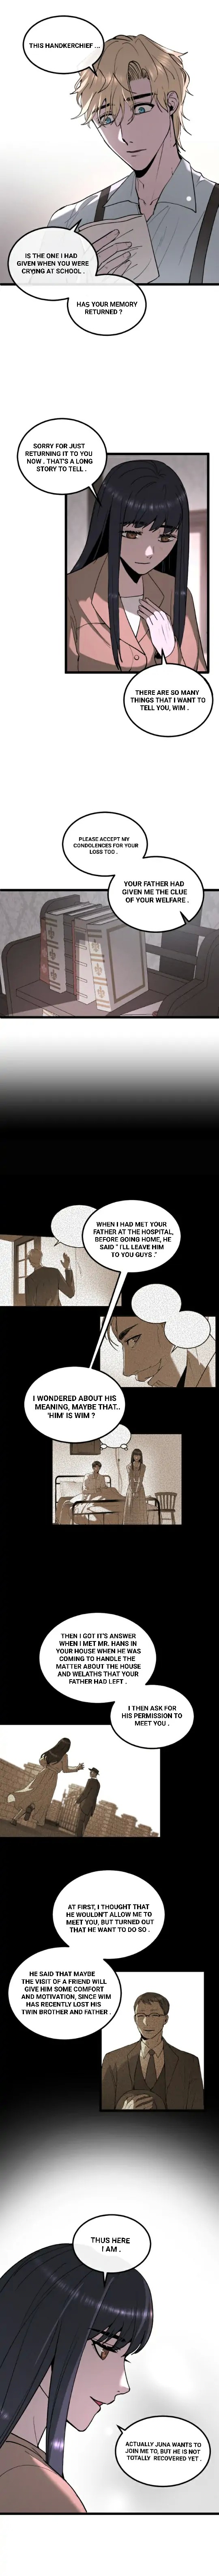 Garden Of The Dead Flowers - Page 3